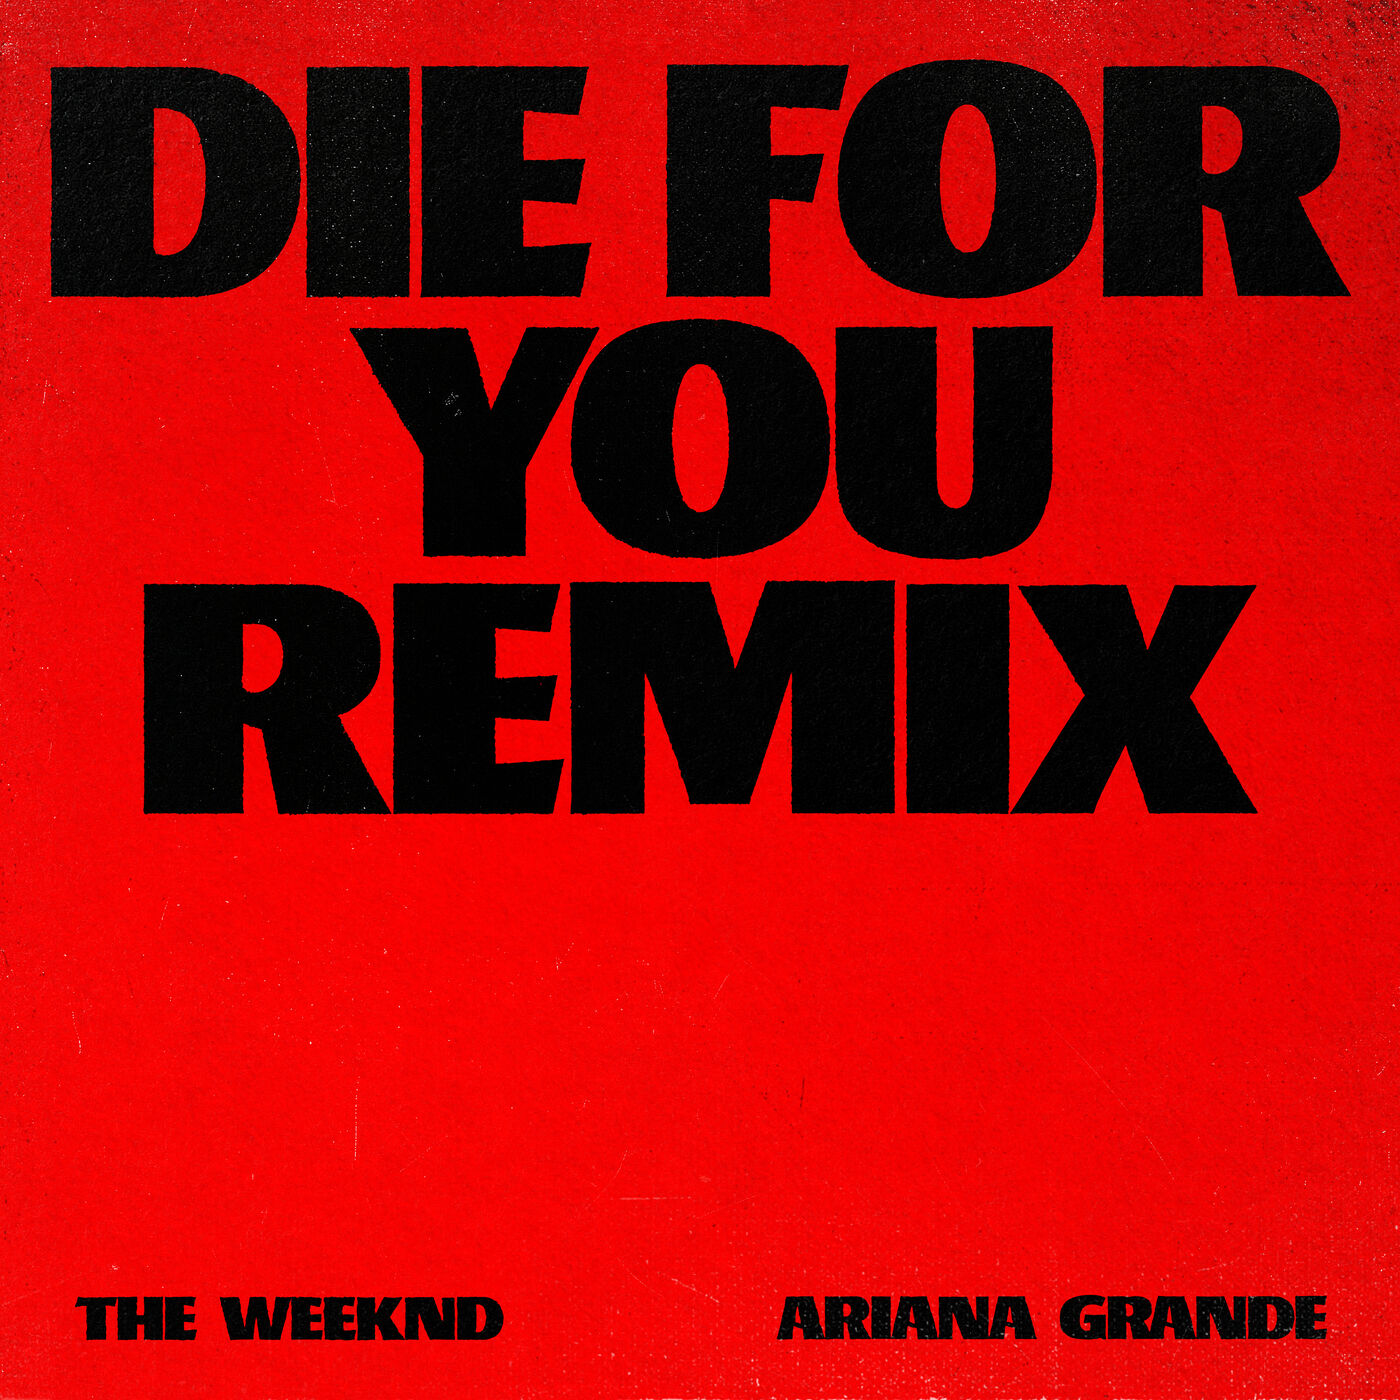 The Weeknd – Die For You (Remix)【44.1kHz／16bit】美国区-OppsUpro音乐帝国